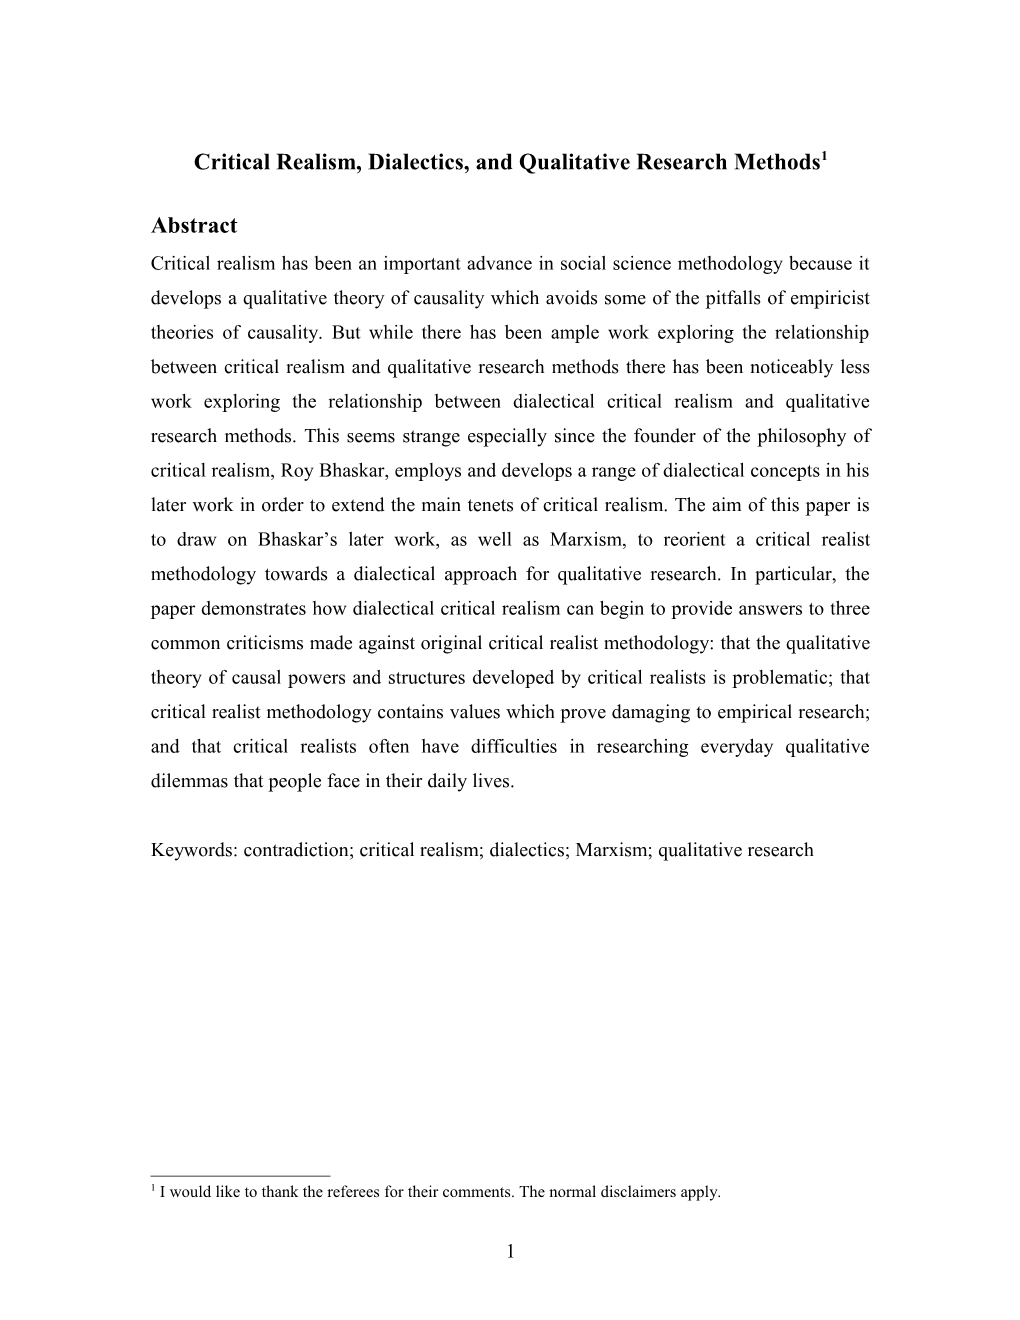 Critical Realism and Qualitative Research Methods